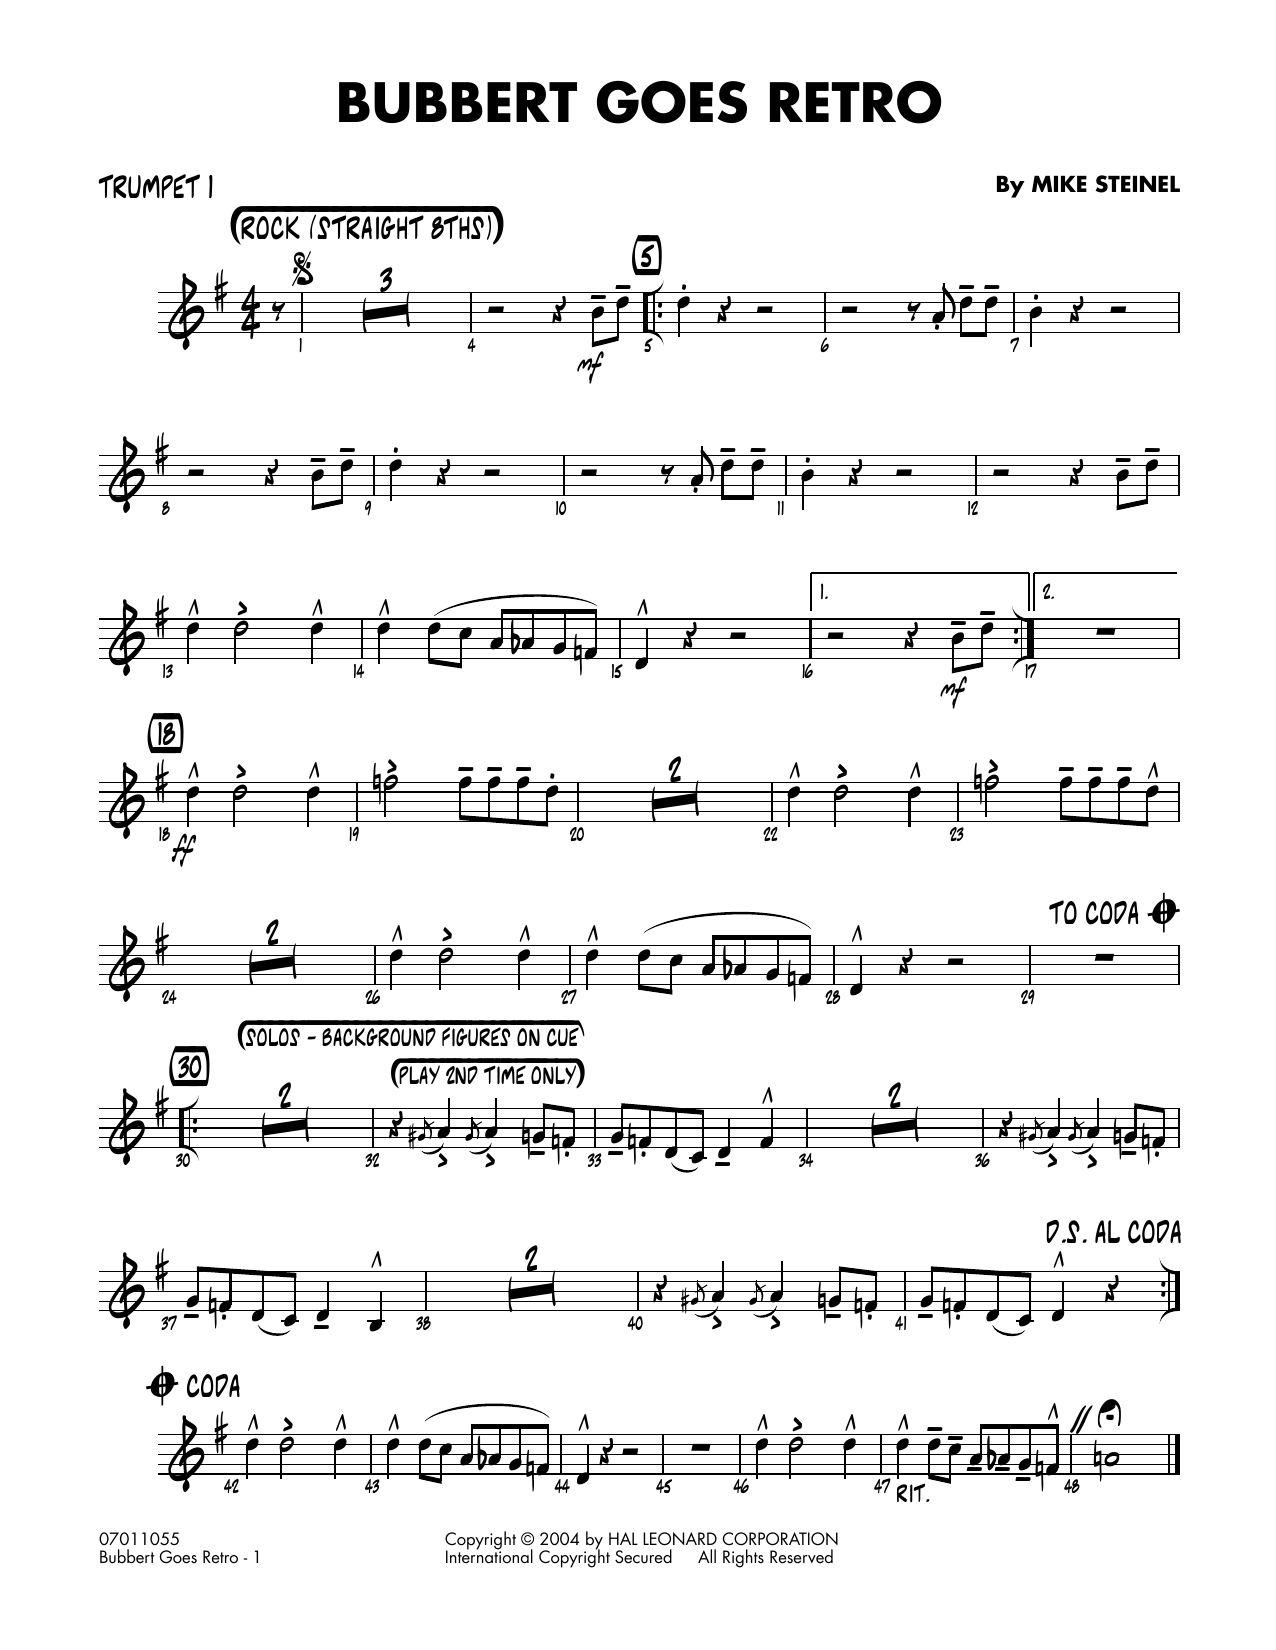 Mike Steinel Bubbert Goes Retro - Trumpet 1 sheet music notes and chords. Download Printable PDF.